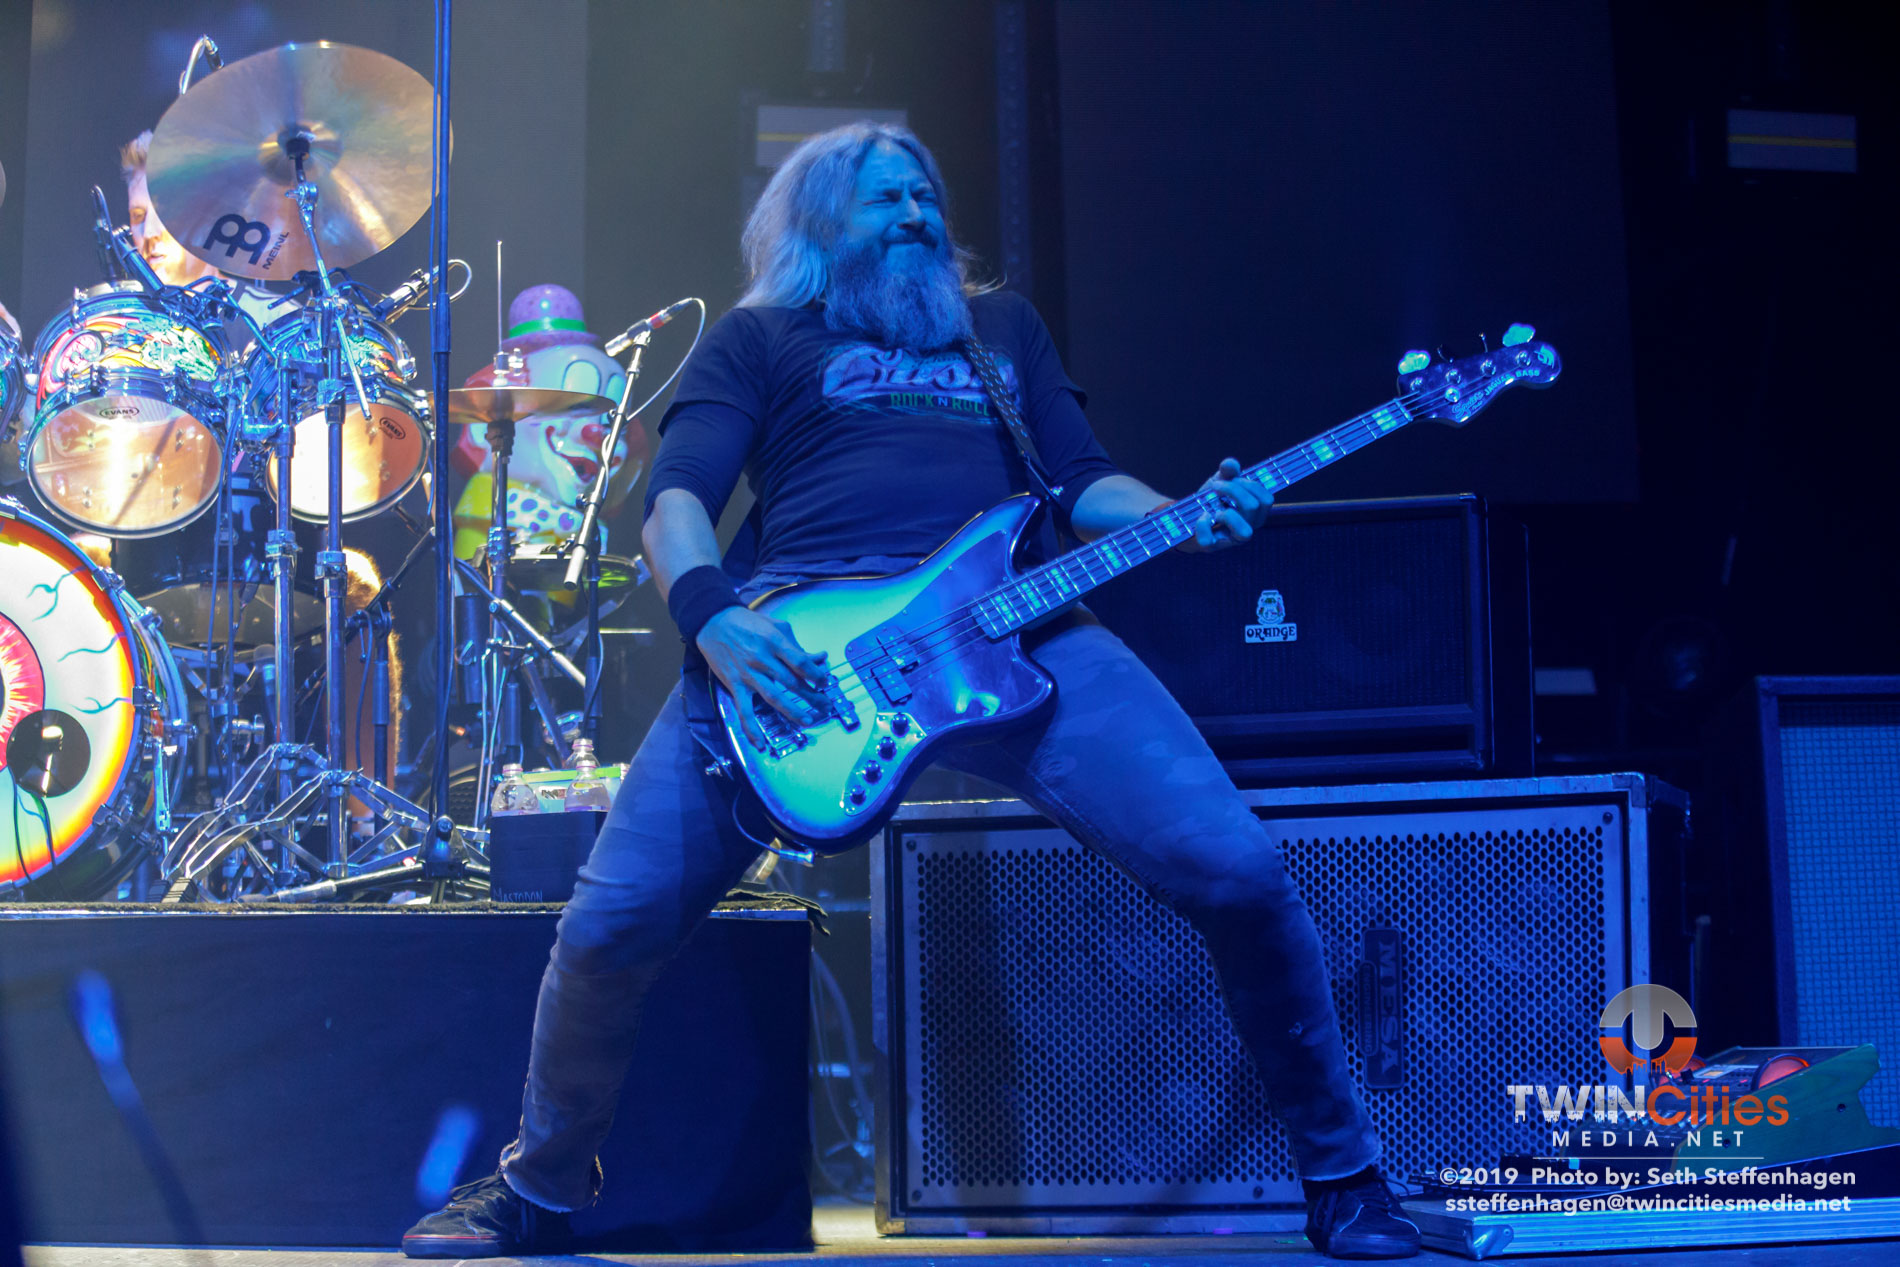 June 15, 2019 - Minneapolis, Minnesota, United States - Mastodon live in concert at The Armory along with Coheed & Cambria and Every Time I Die.

(Photo by Seth Steffenhagen/Steffenhagen Photography)